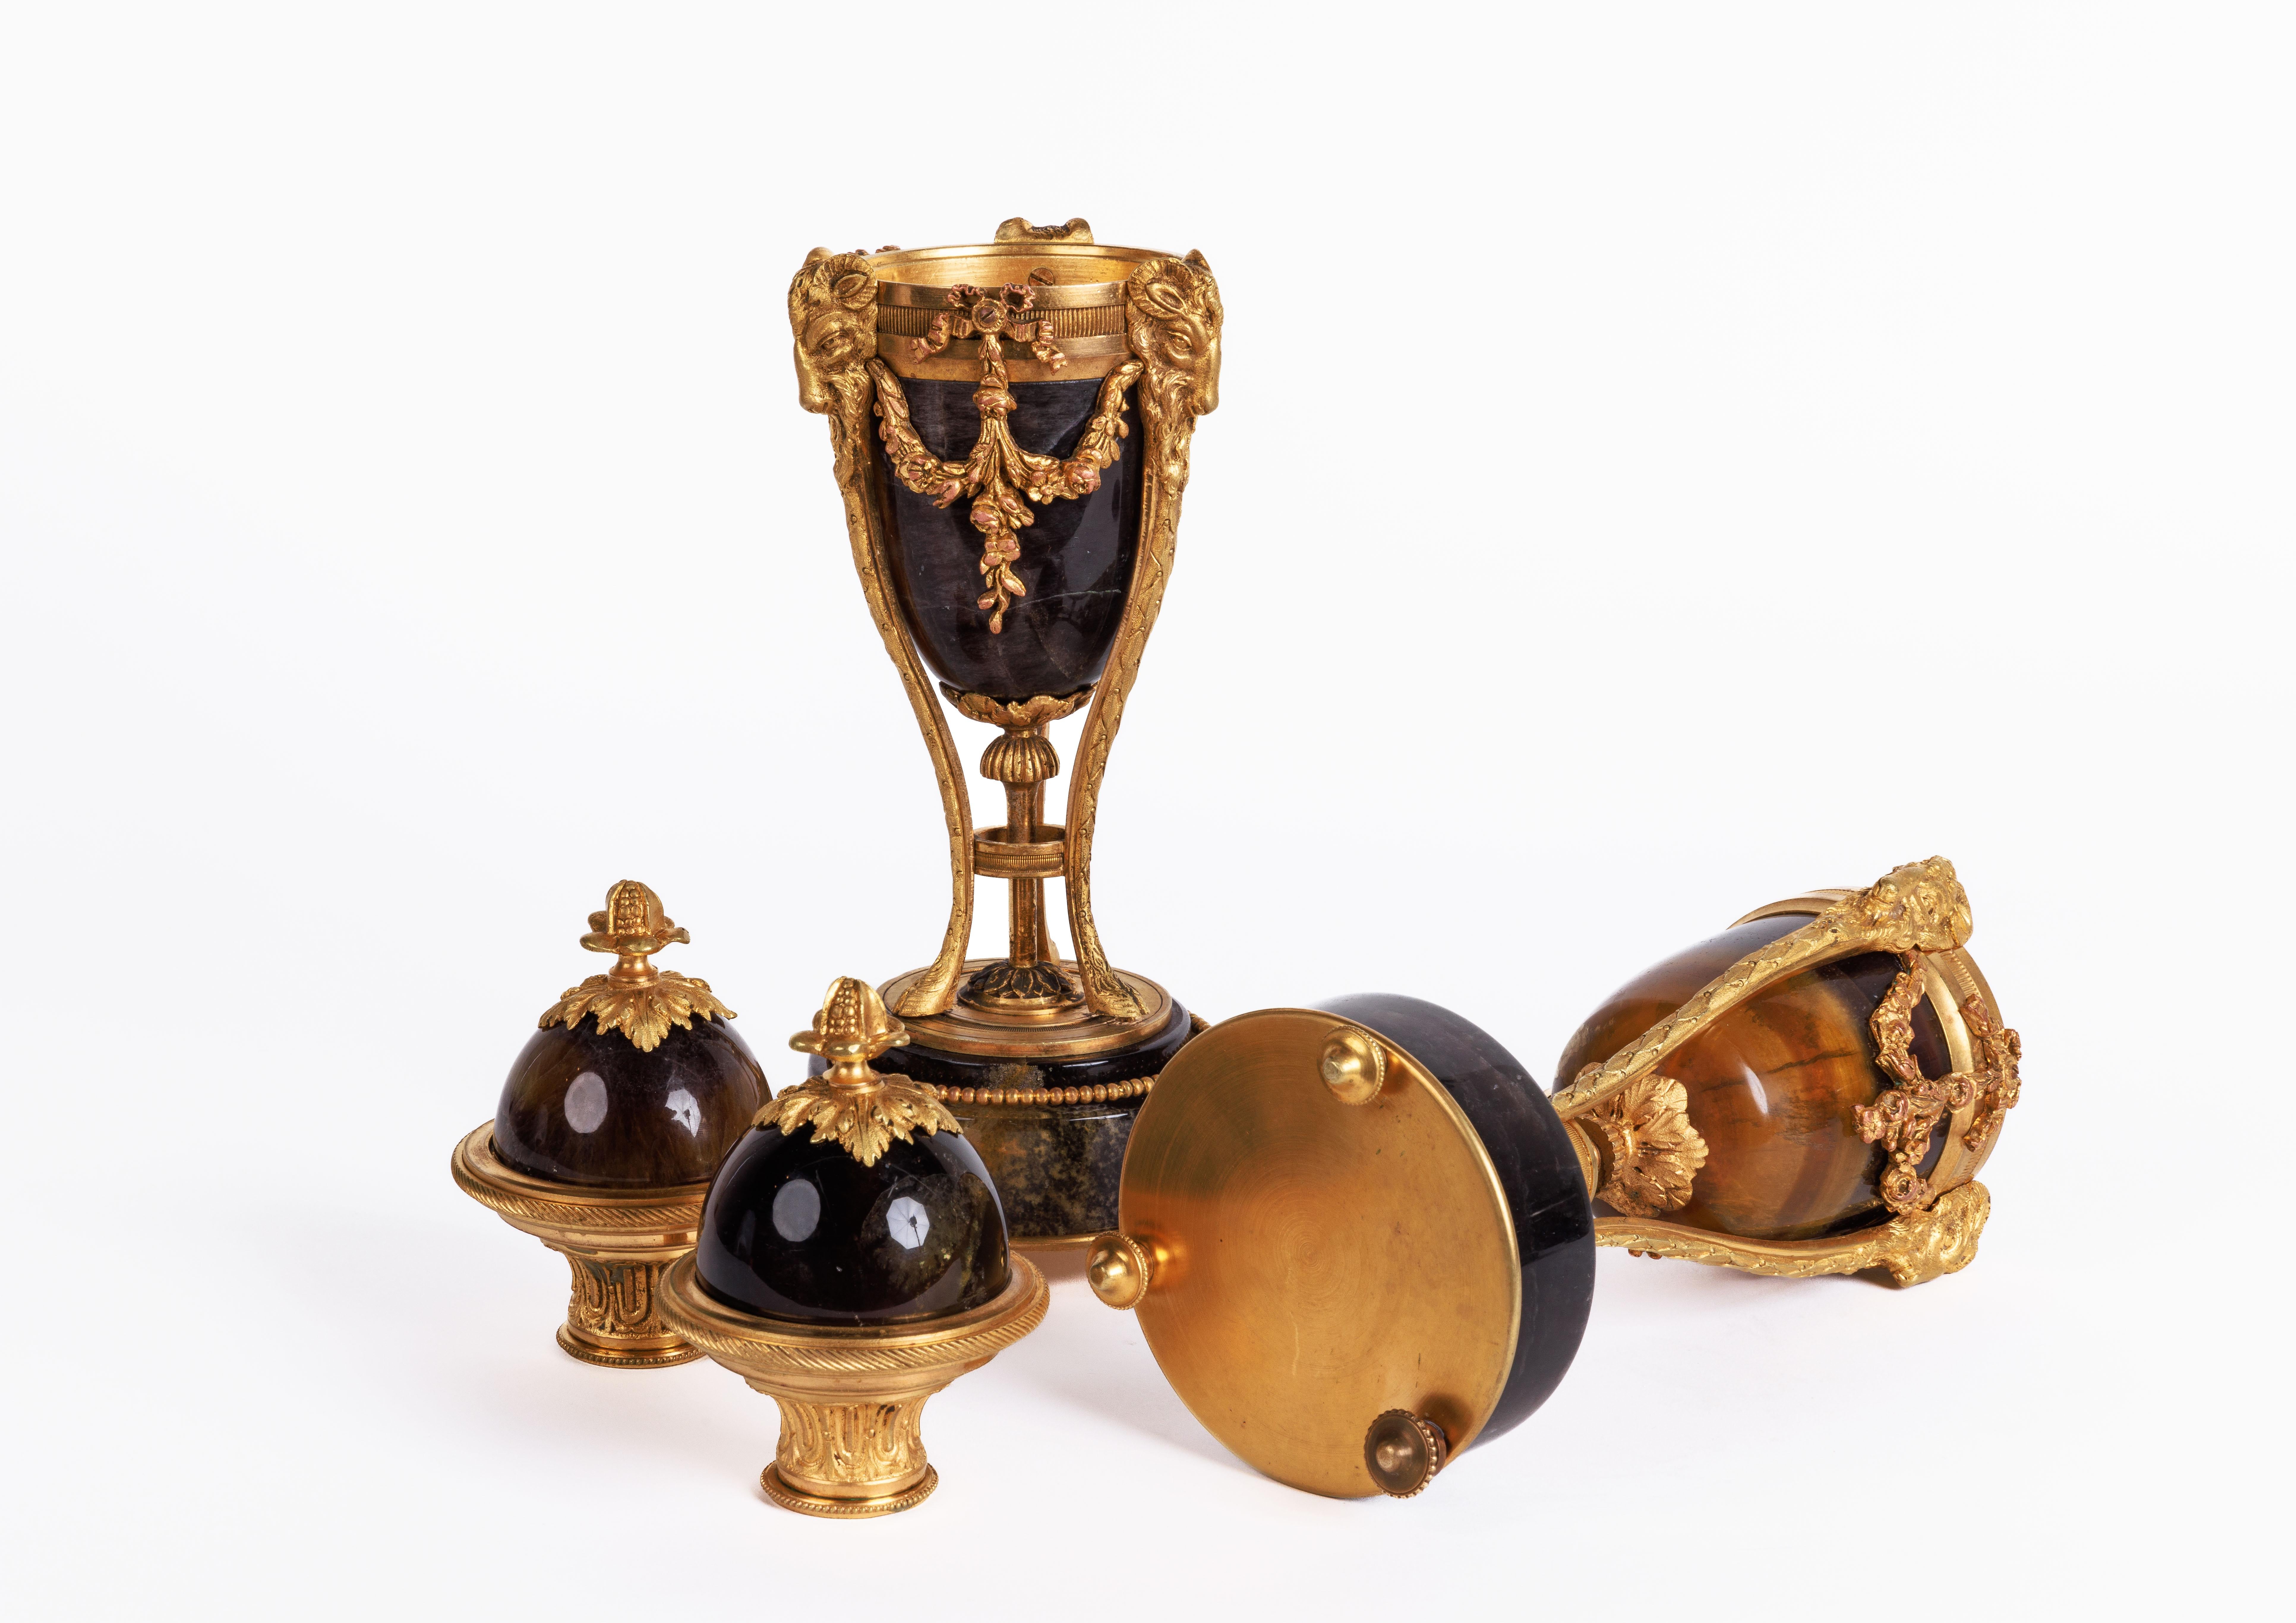 A Rare Pair of French Ormolu-Mounted Blue John Vases Candlesticks, C. 1870 In Good Condition For Sale In New York, NY